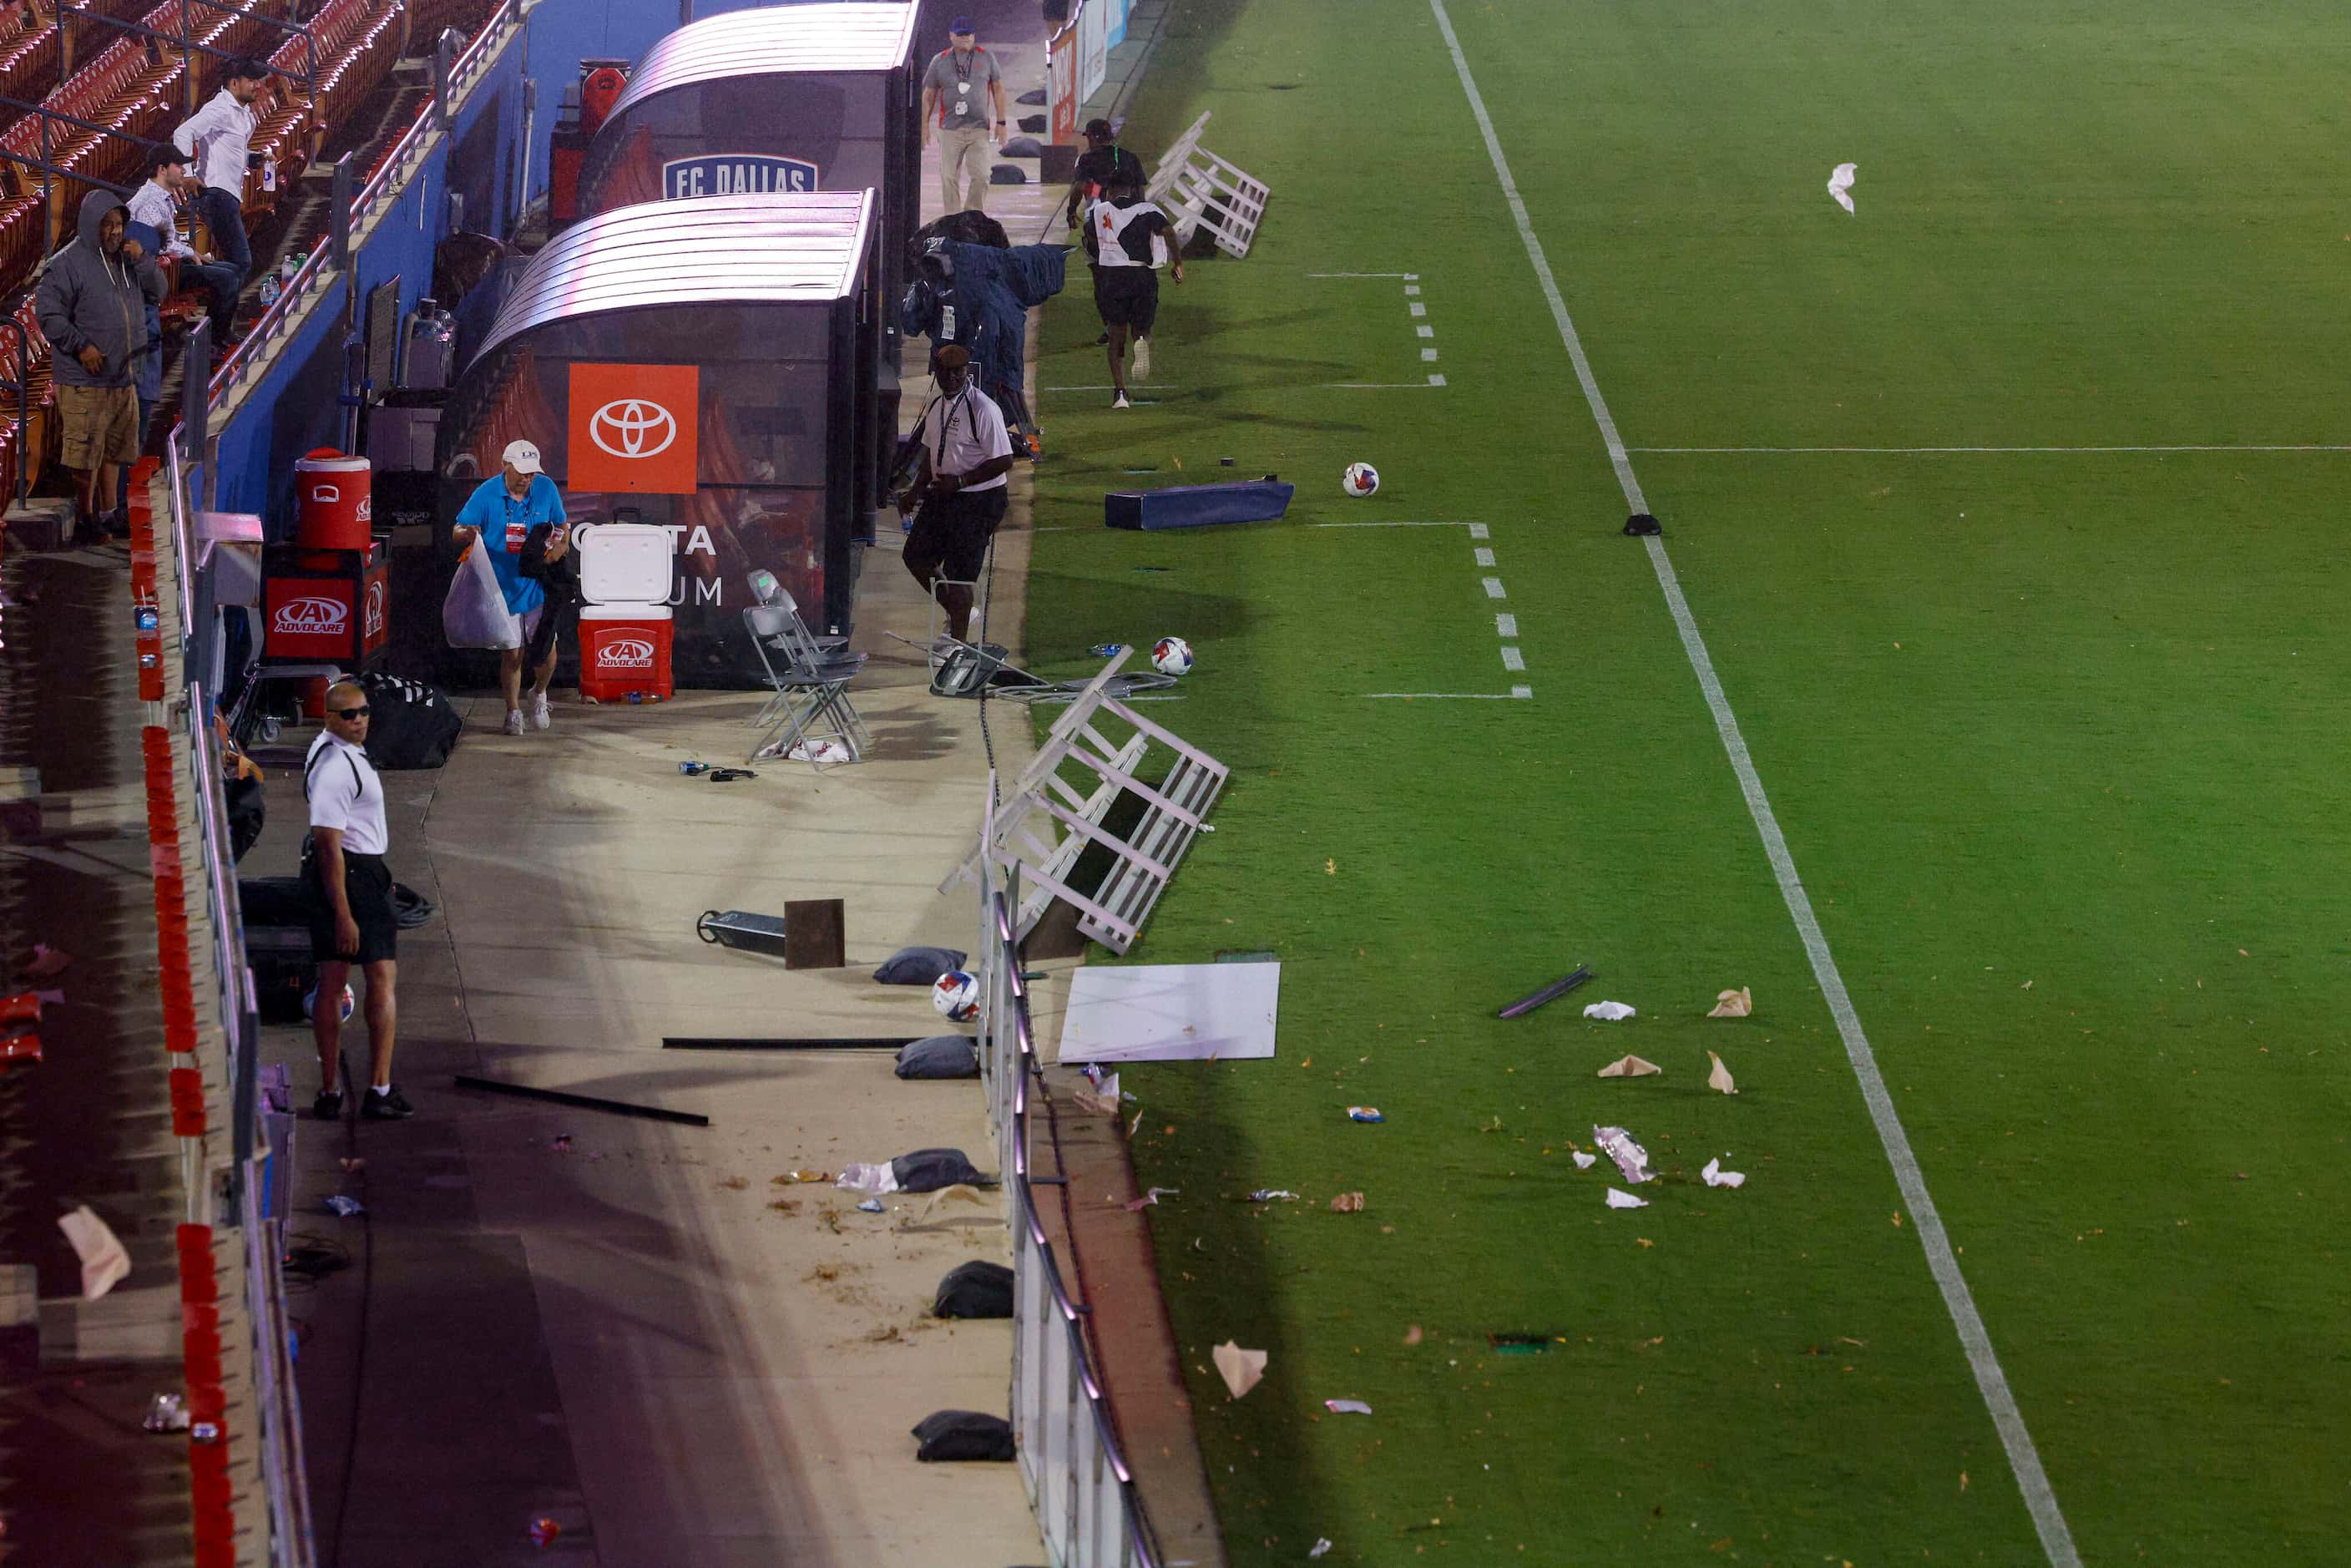 Strong winds blow trash and debris onto the field as a severe thunderstorm moves in during a...